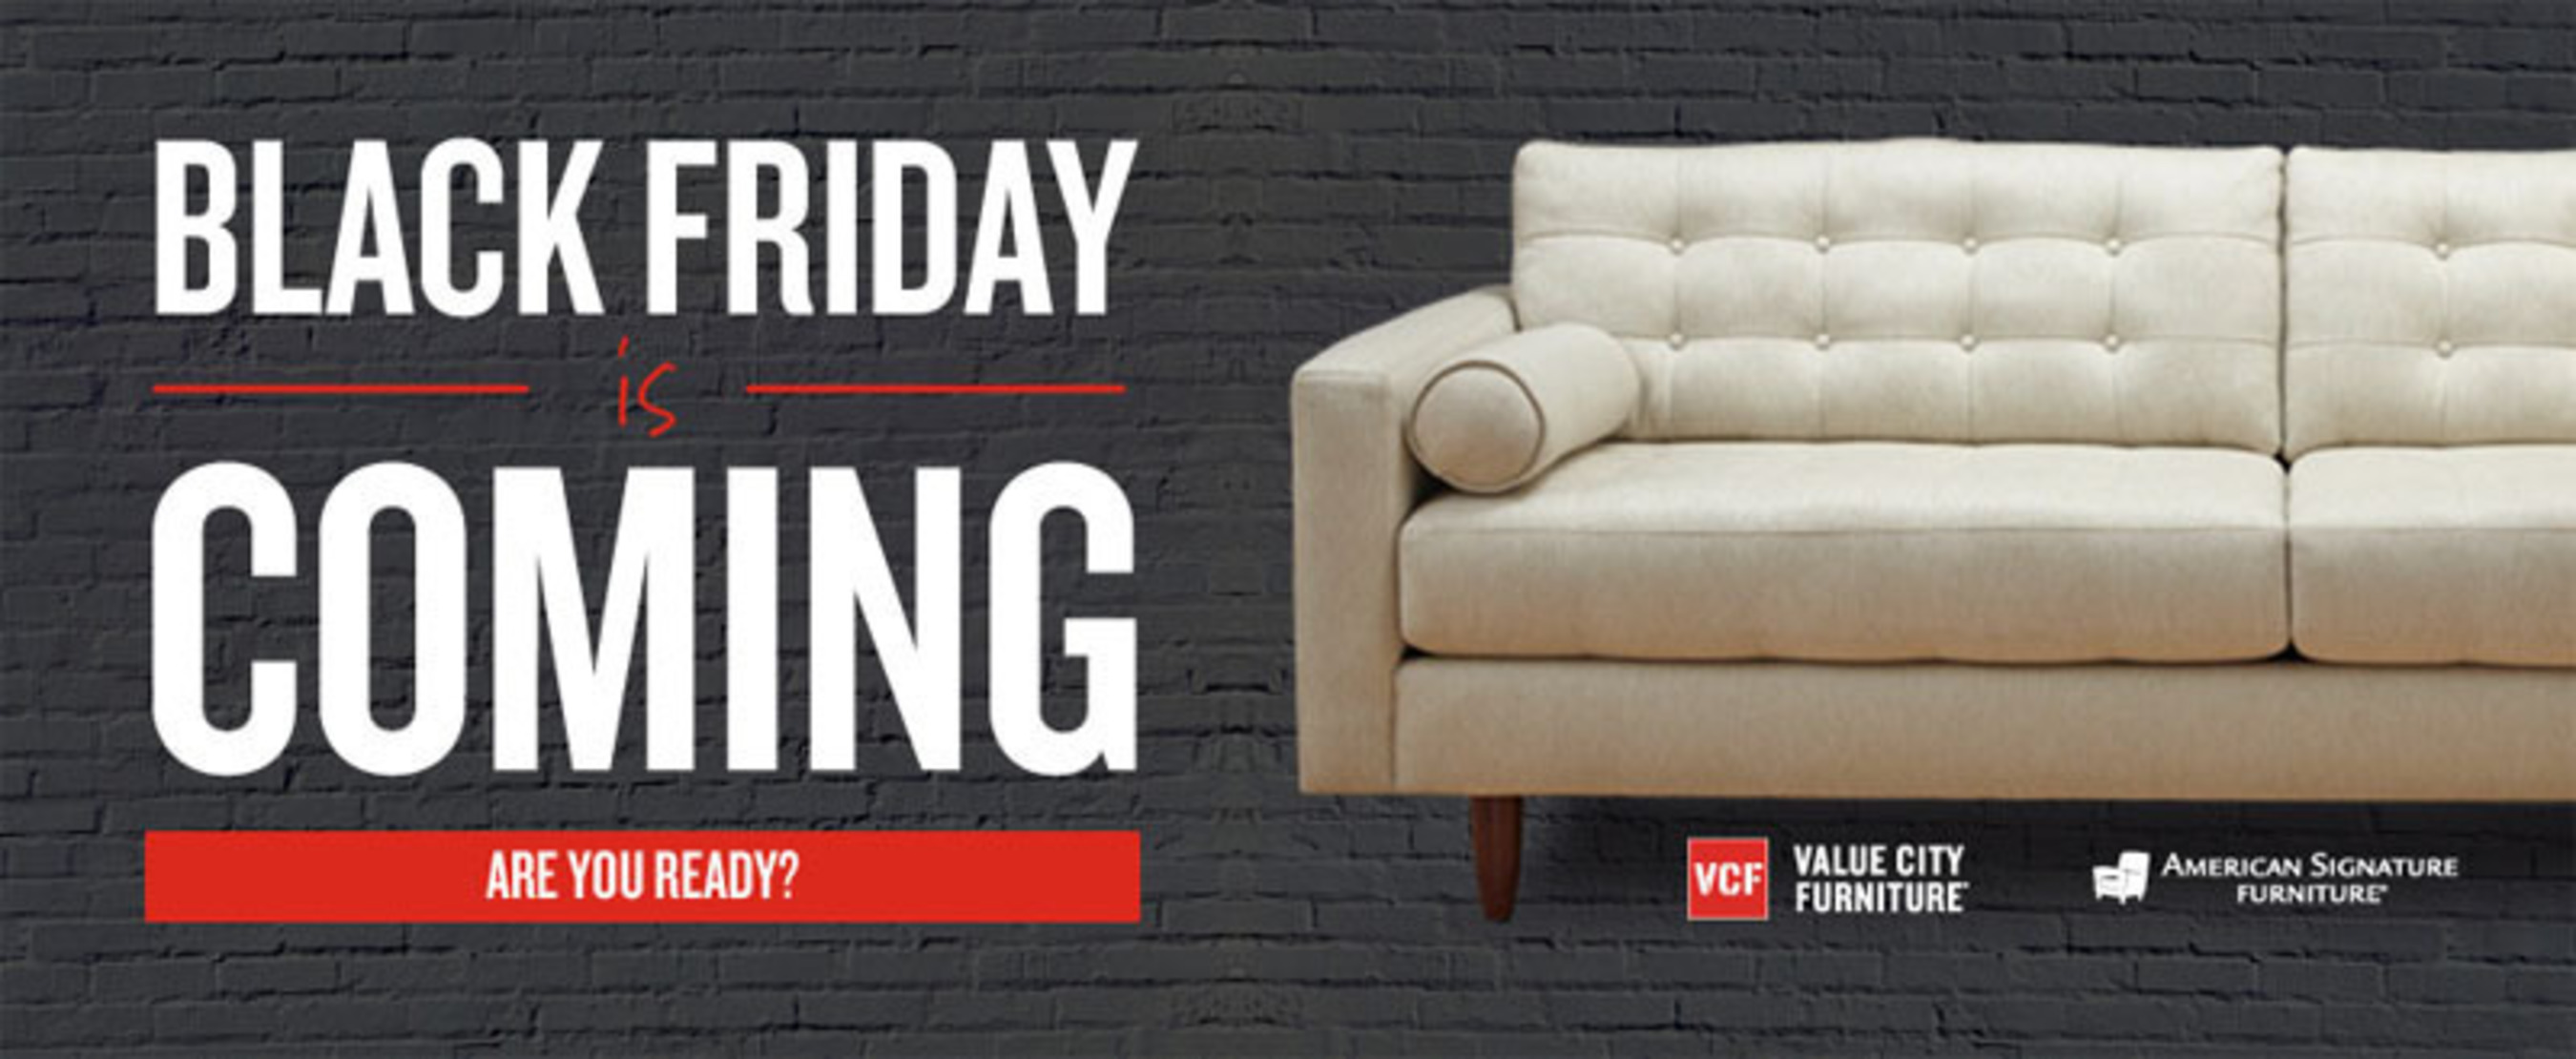 Thanks to Easy Pass, Black Friday Shopping at Value City Furniture and American Signature Furniture is a breeze! (PRNewsFoto/American Signature, Inc.) (PRNewsFoto/AMERICAN SIGNATURE, INC.)